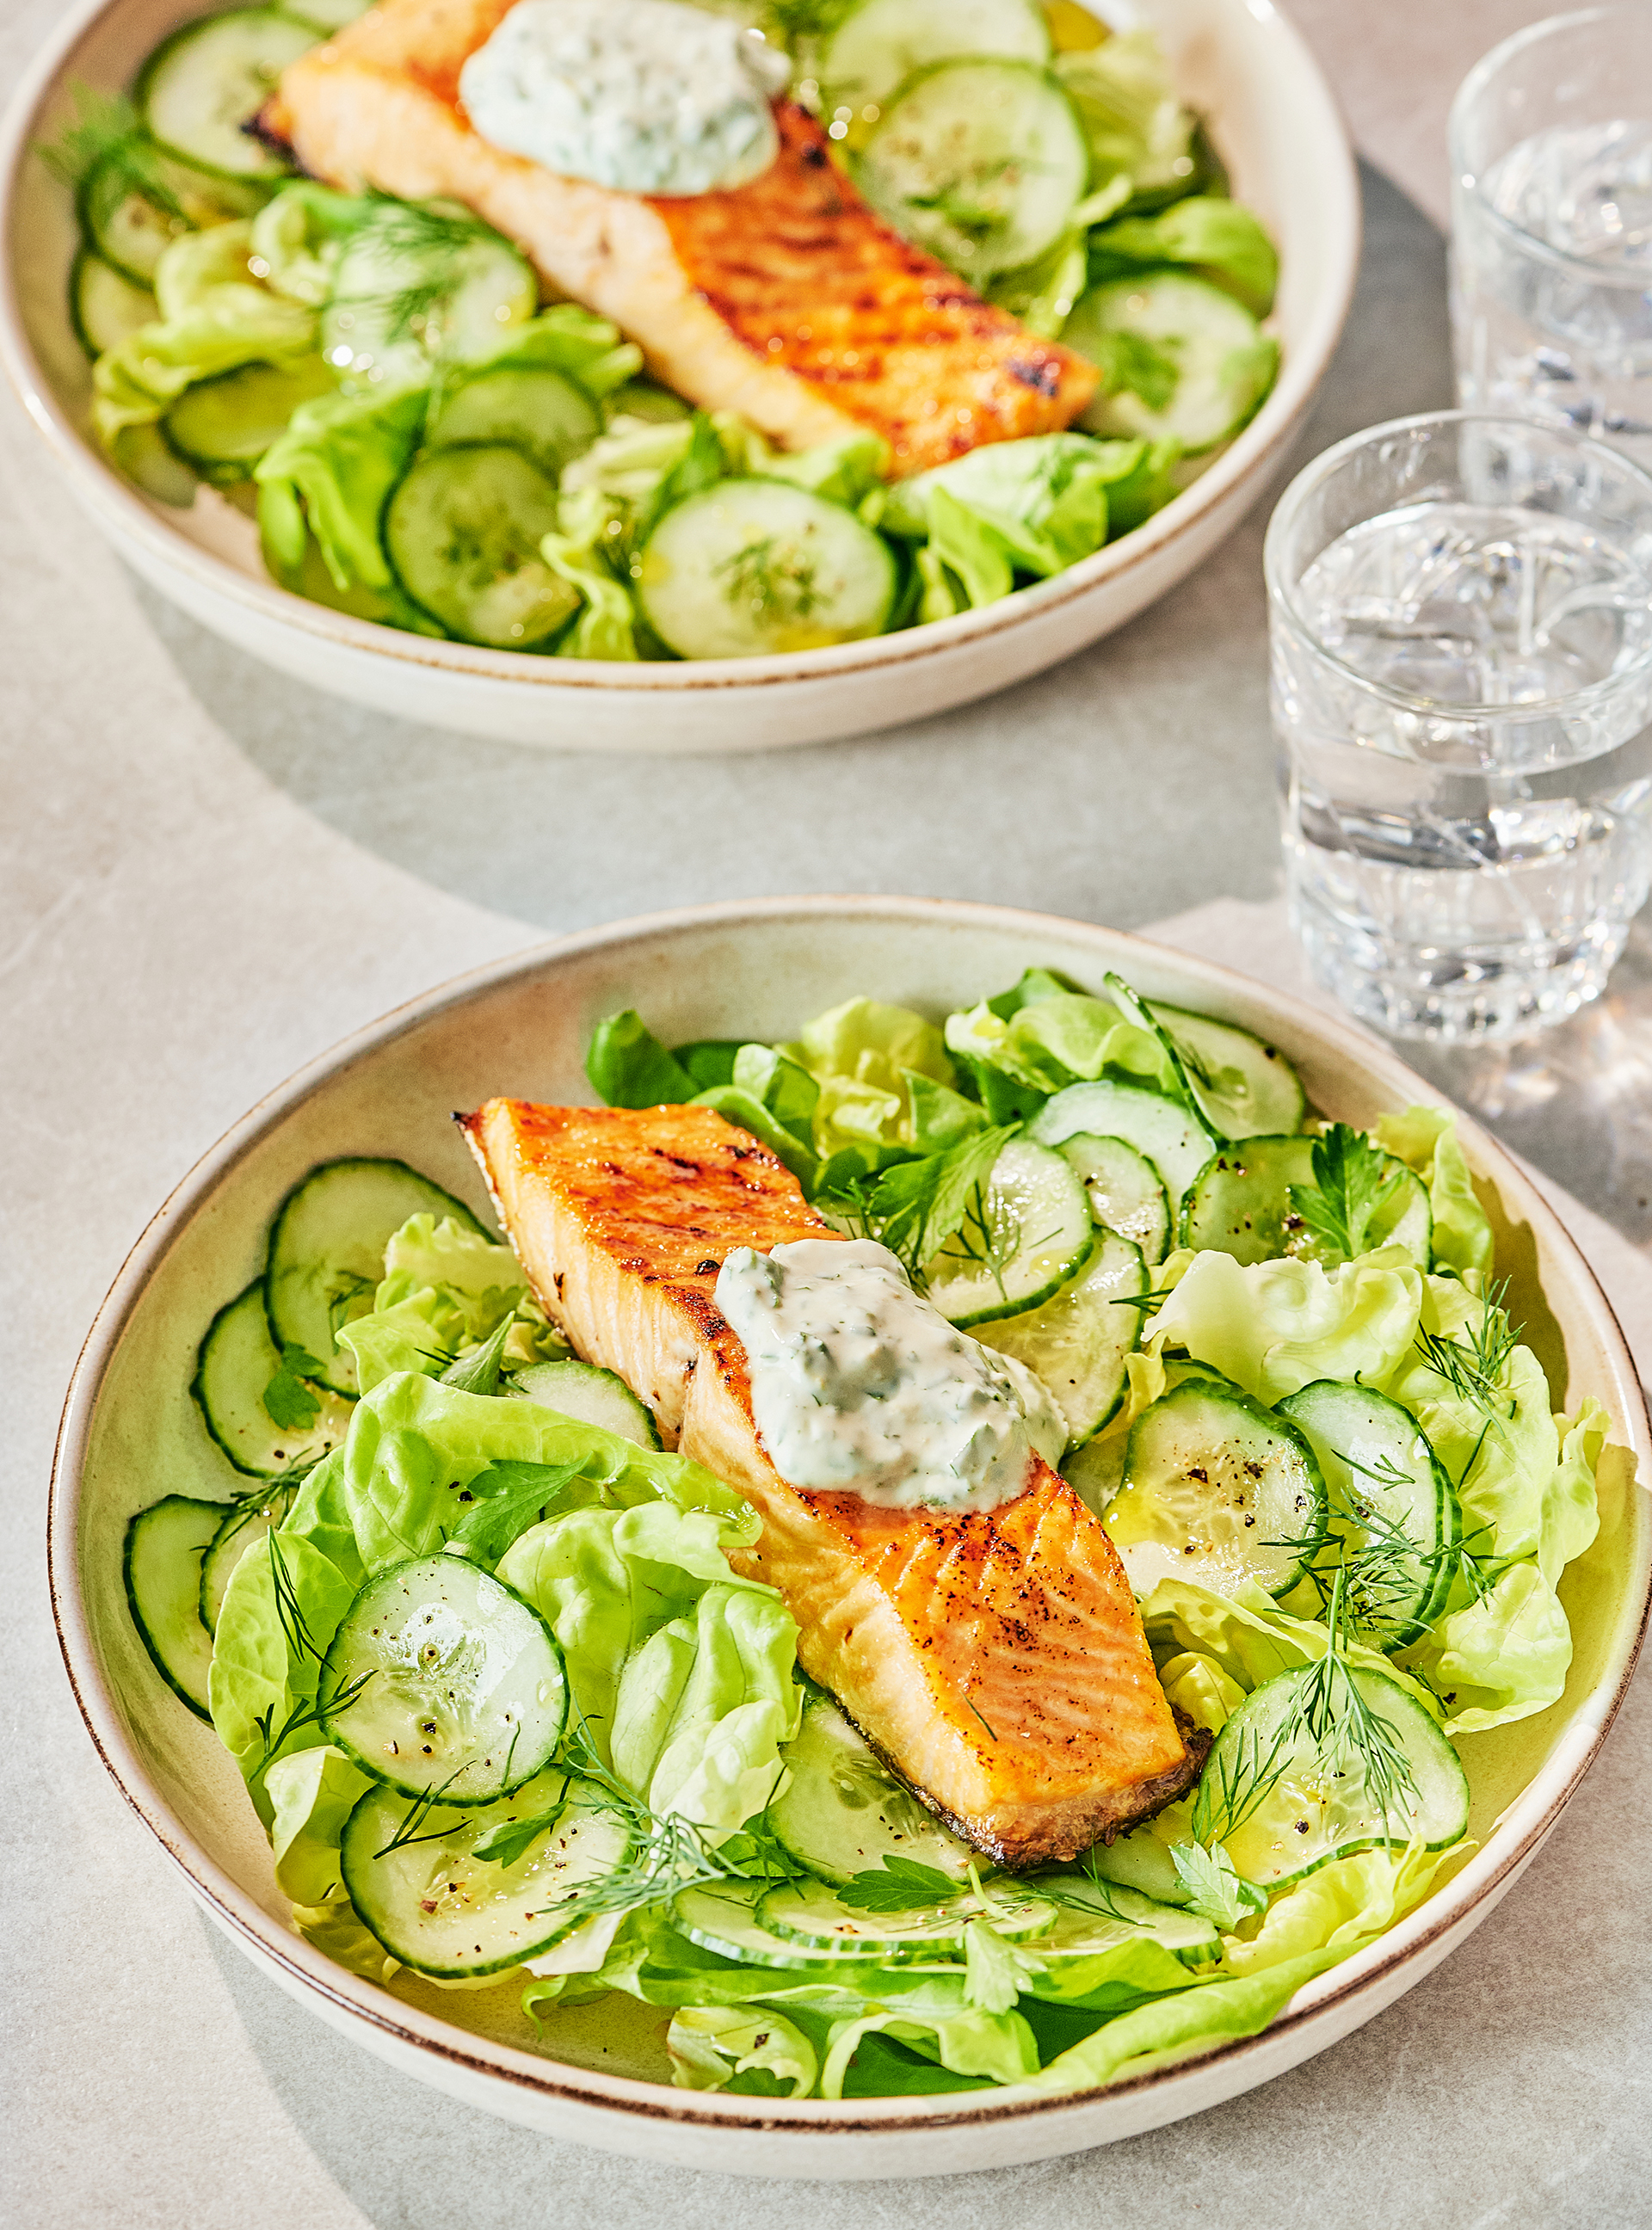 Grilled Salmon with Salad and Herbed Yogurt